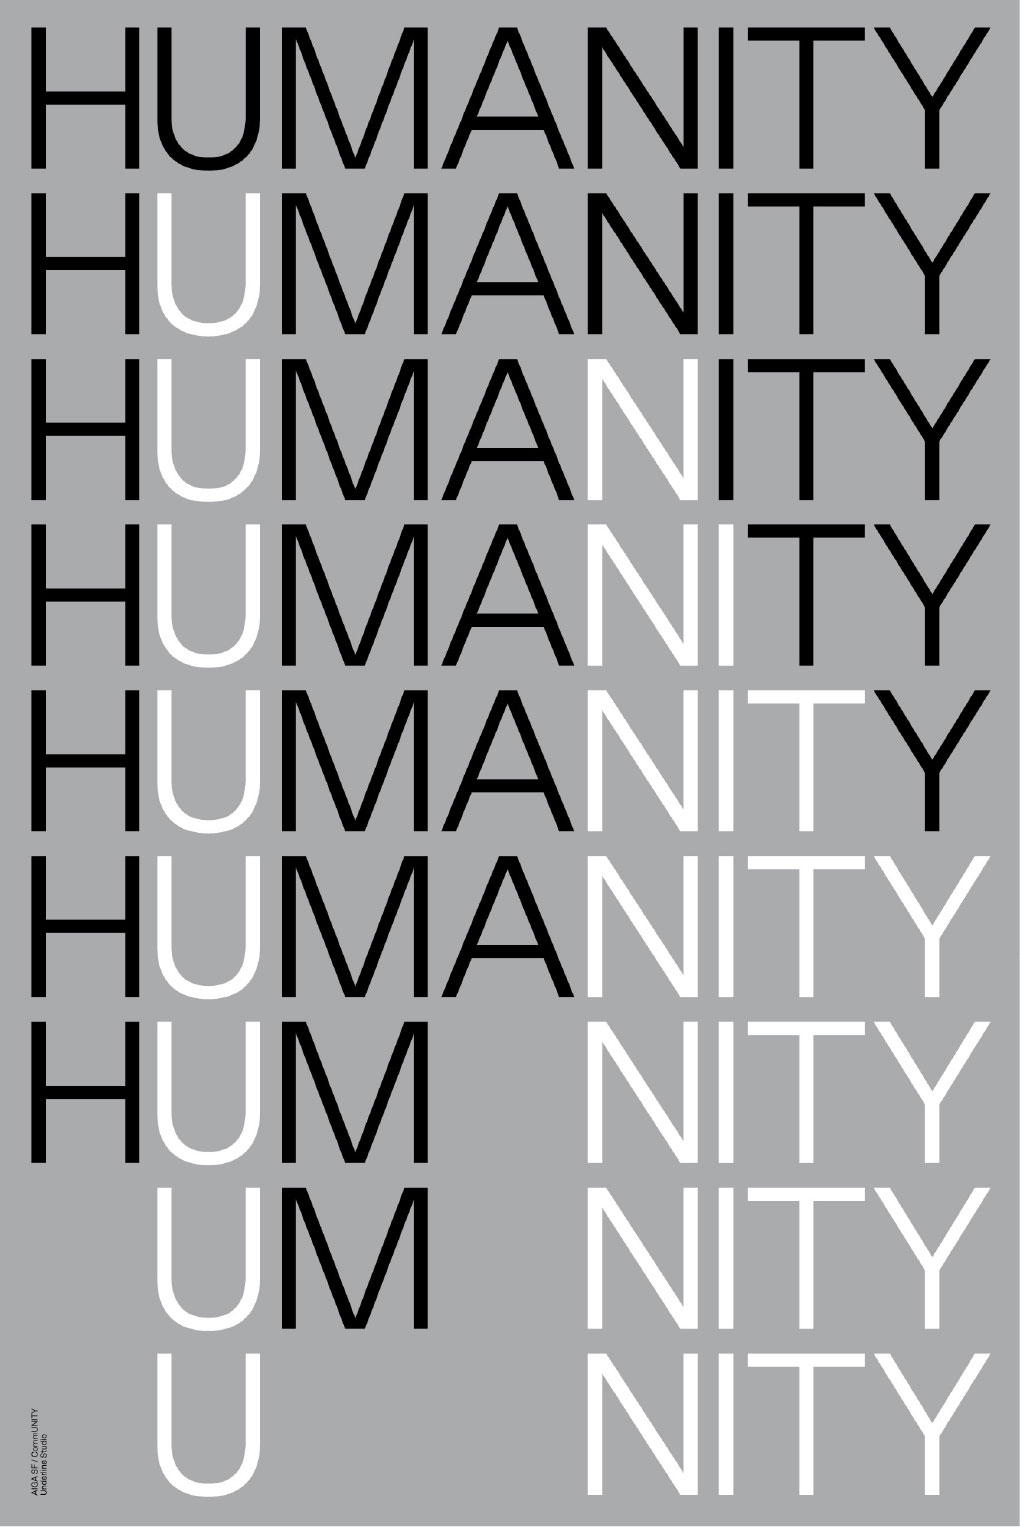 Humanity poster design